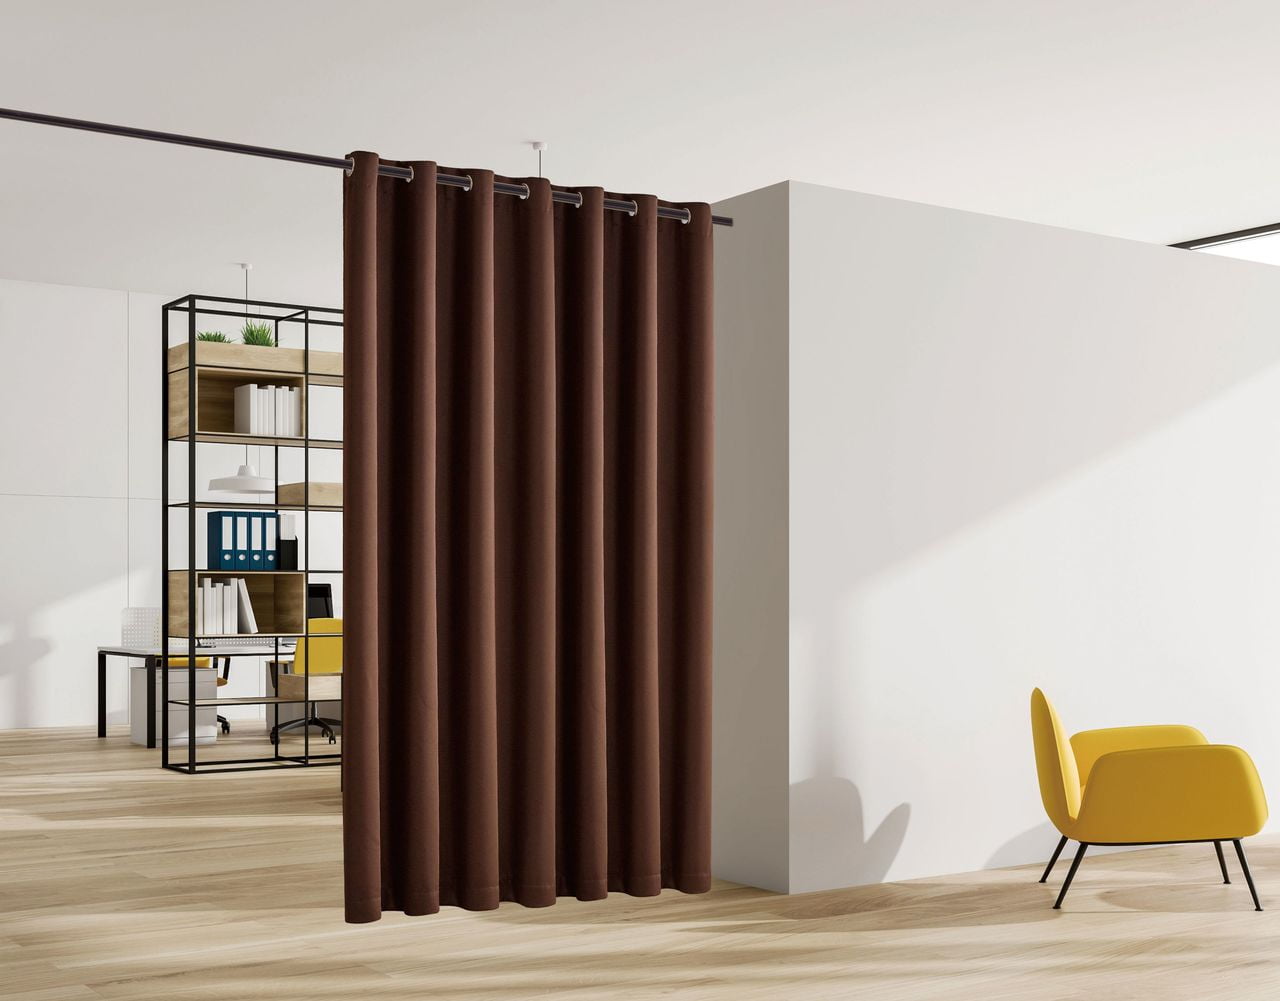 Details about   1 PANEL INSULATE THERMAL WINDOW Blackout CURTAIN SPACE ROOM DIVIDER PARTITION 